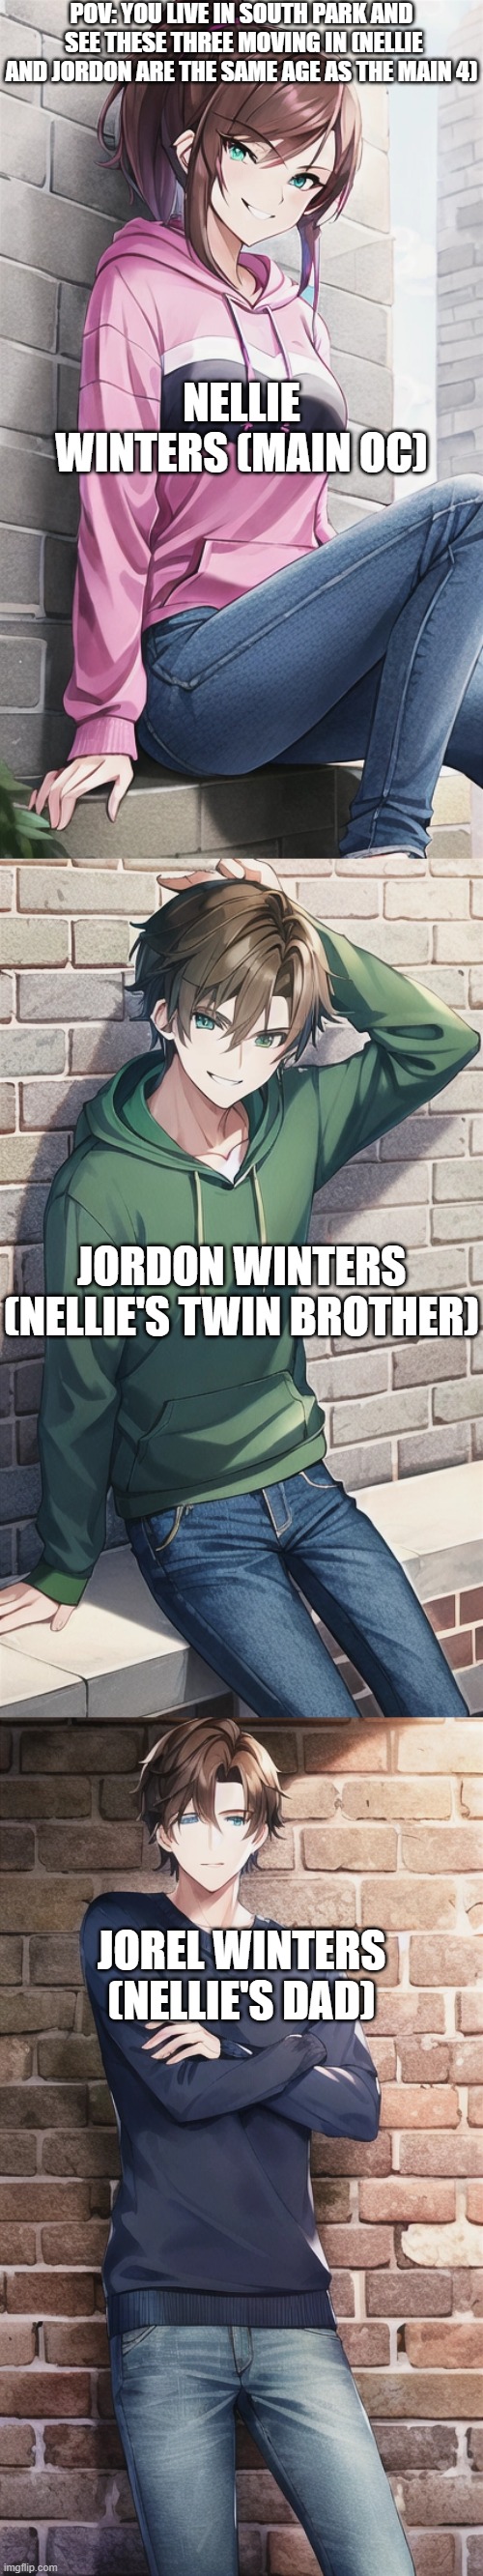 My South Park OCs(As AI generated anime characters) | POV: YOU LIVE IN SOUTH PARK AND  SEE THESE THREE MOVING IN (NELLIE AND JORDON ARE THE SAME AGE AS THE MAIN 4); NELLIE WINTERS (MAIN OC); JORDON WINTERS (NELLIE'S TWIN BROTHER); JOREL WINTERS (NELLIE'S DAD) | made w/ Imgflip meme maker